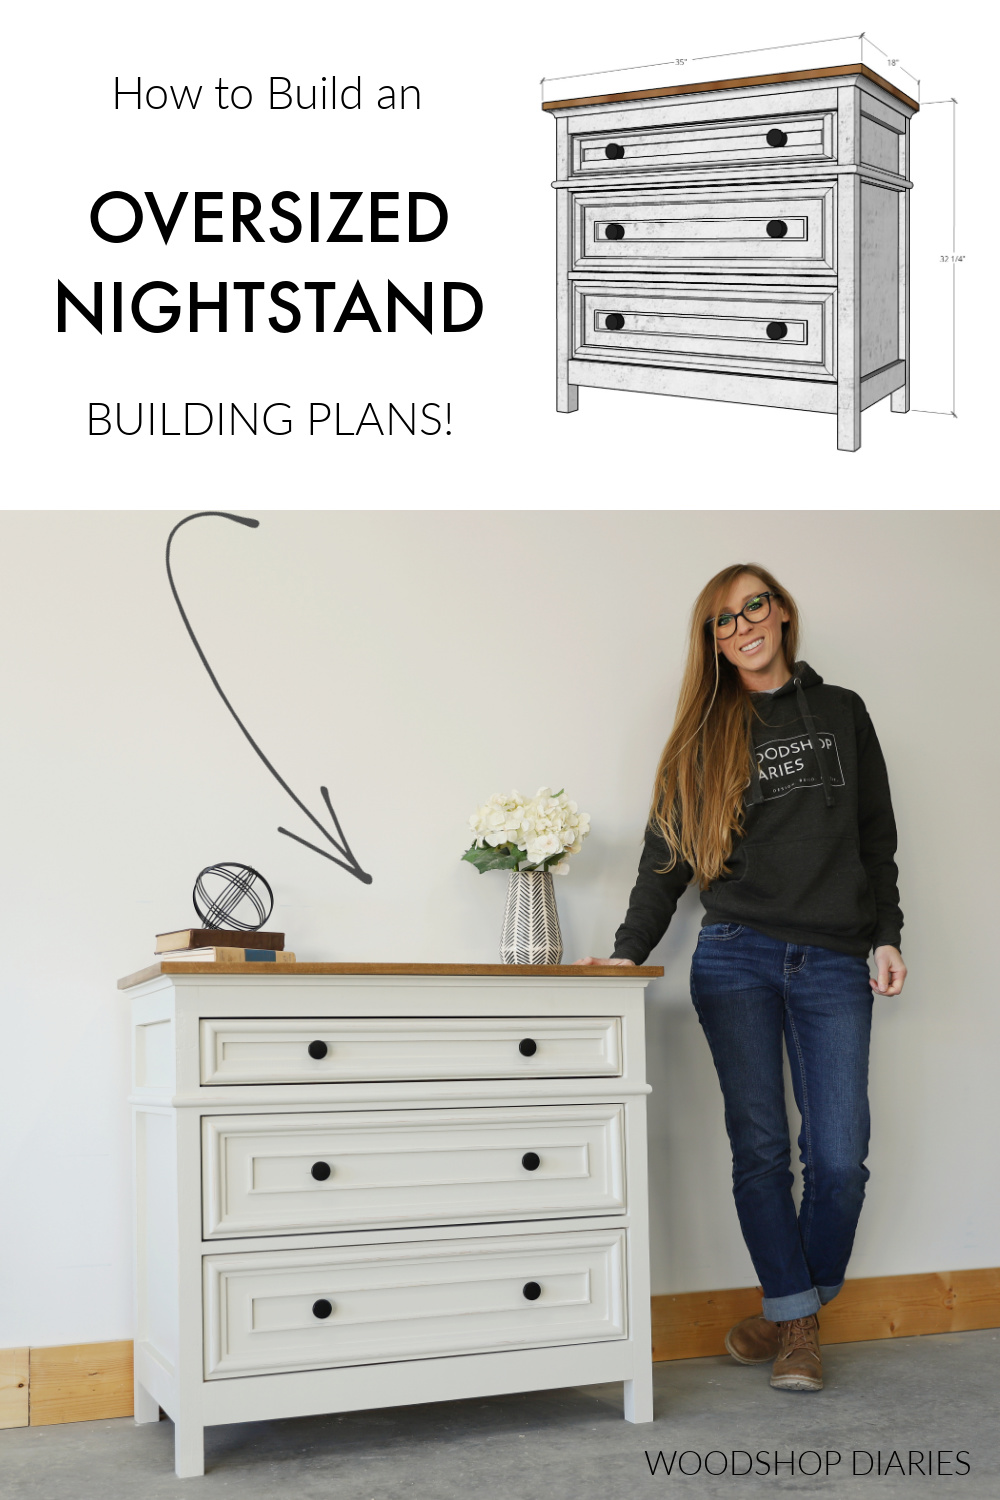 Pinterest collage image showing Shara Woodshop Diaries with DIY oversized nightstand on bottom and computer diagram of overall dimensions at top with text "how to build an oversized nightstand"